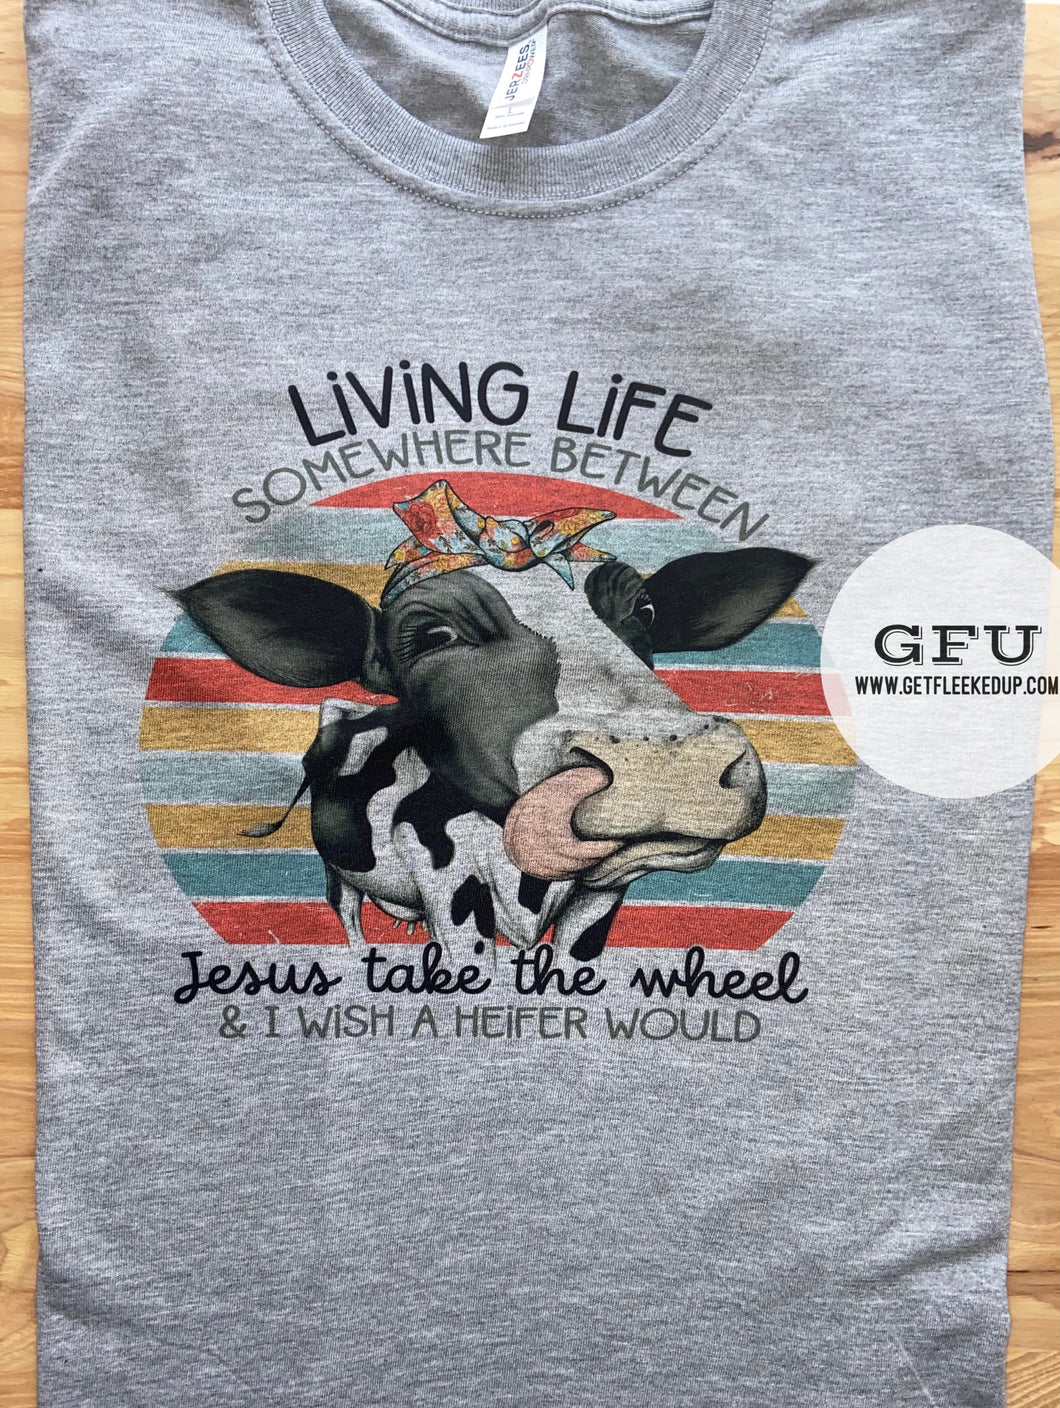 Living life somewhere between Jesus take the wheel and I wish a heifer would